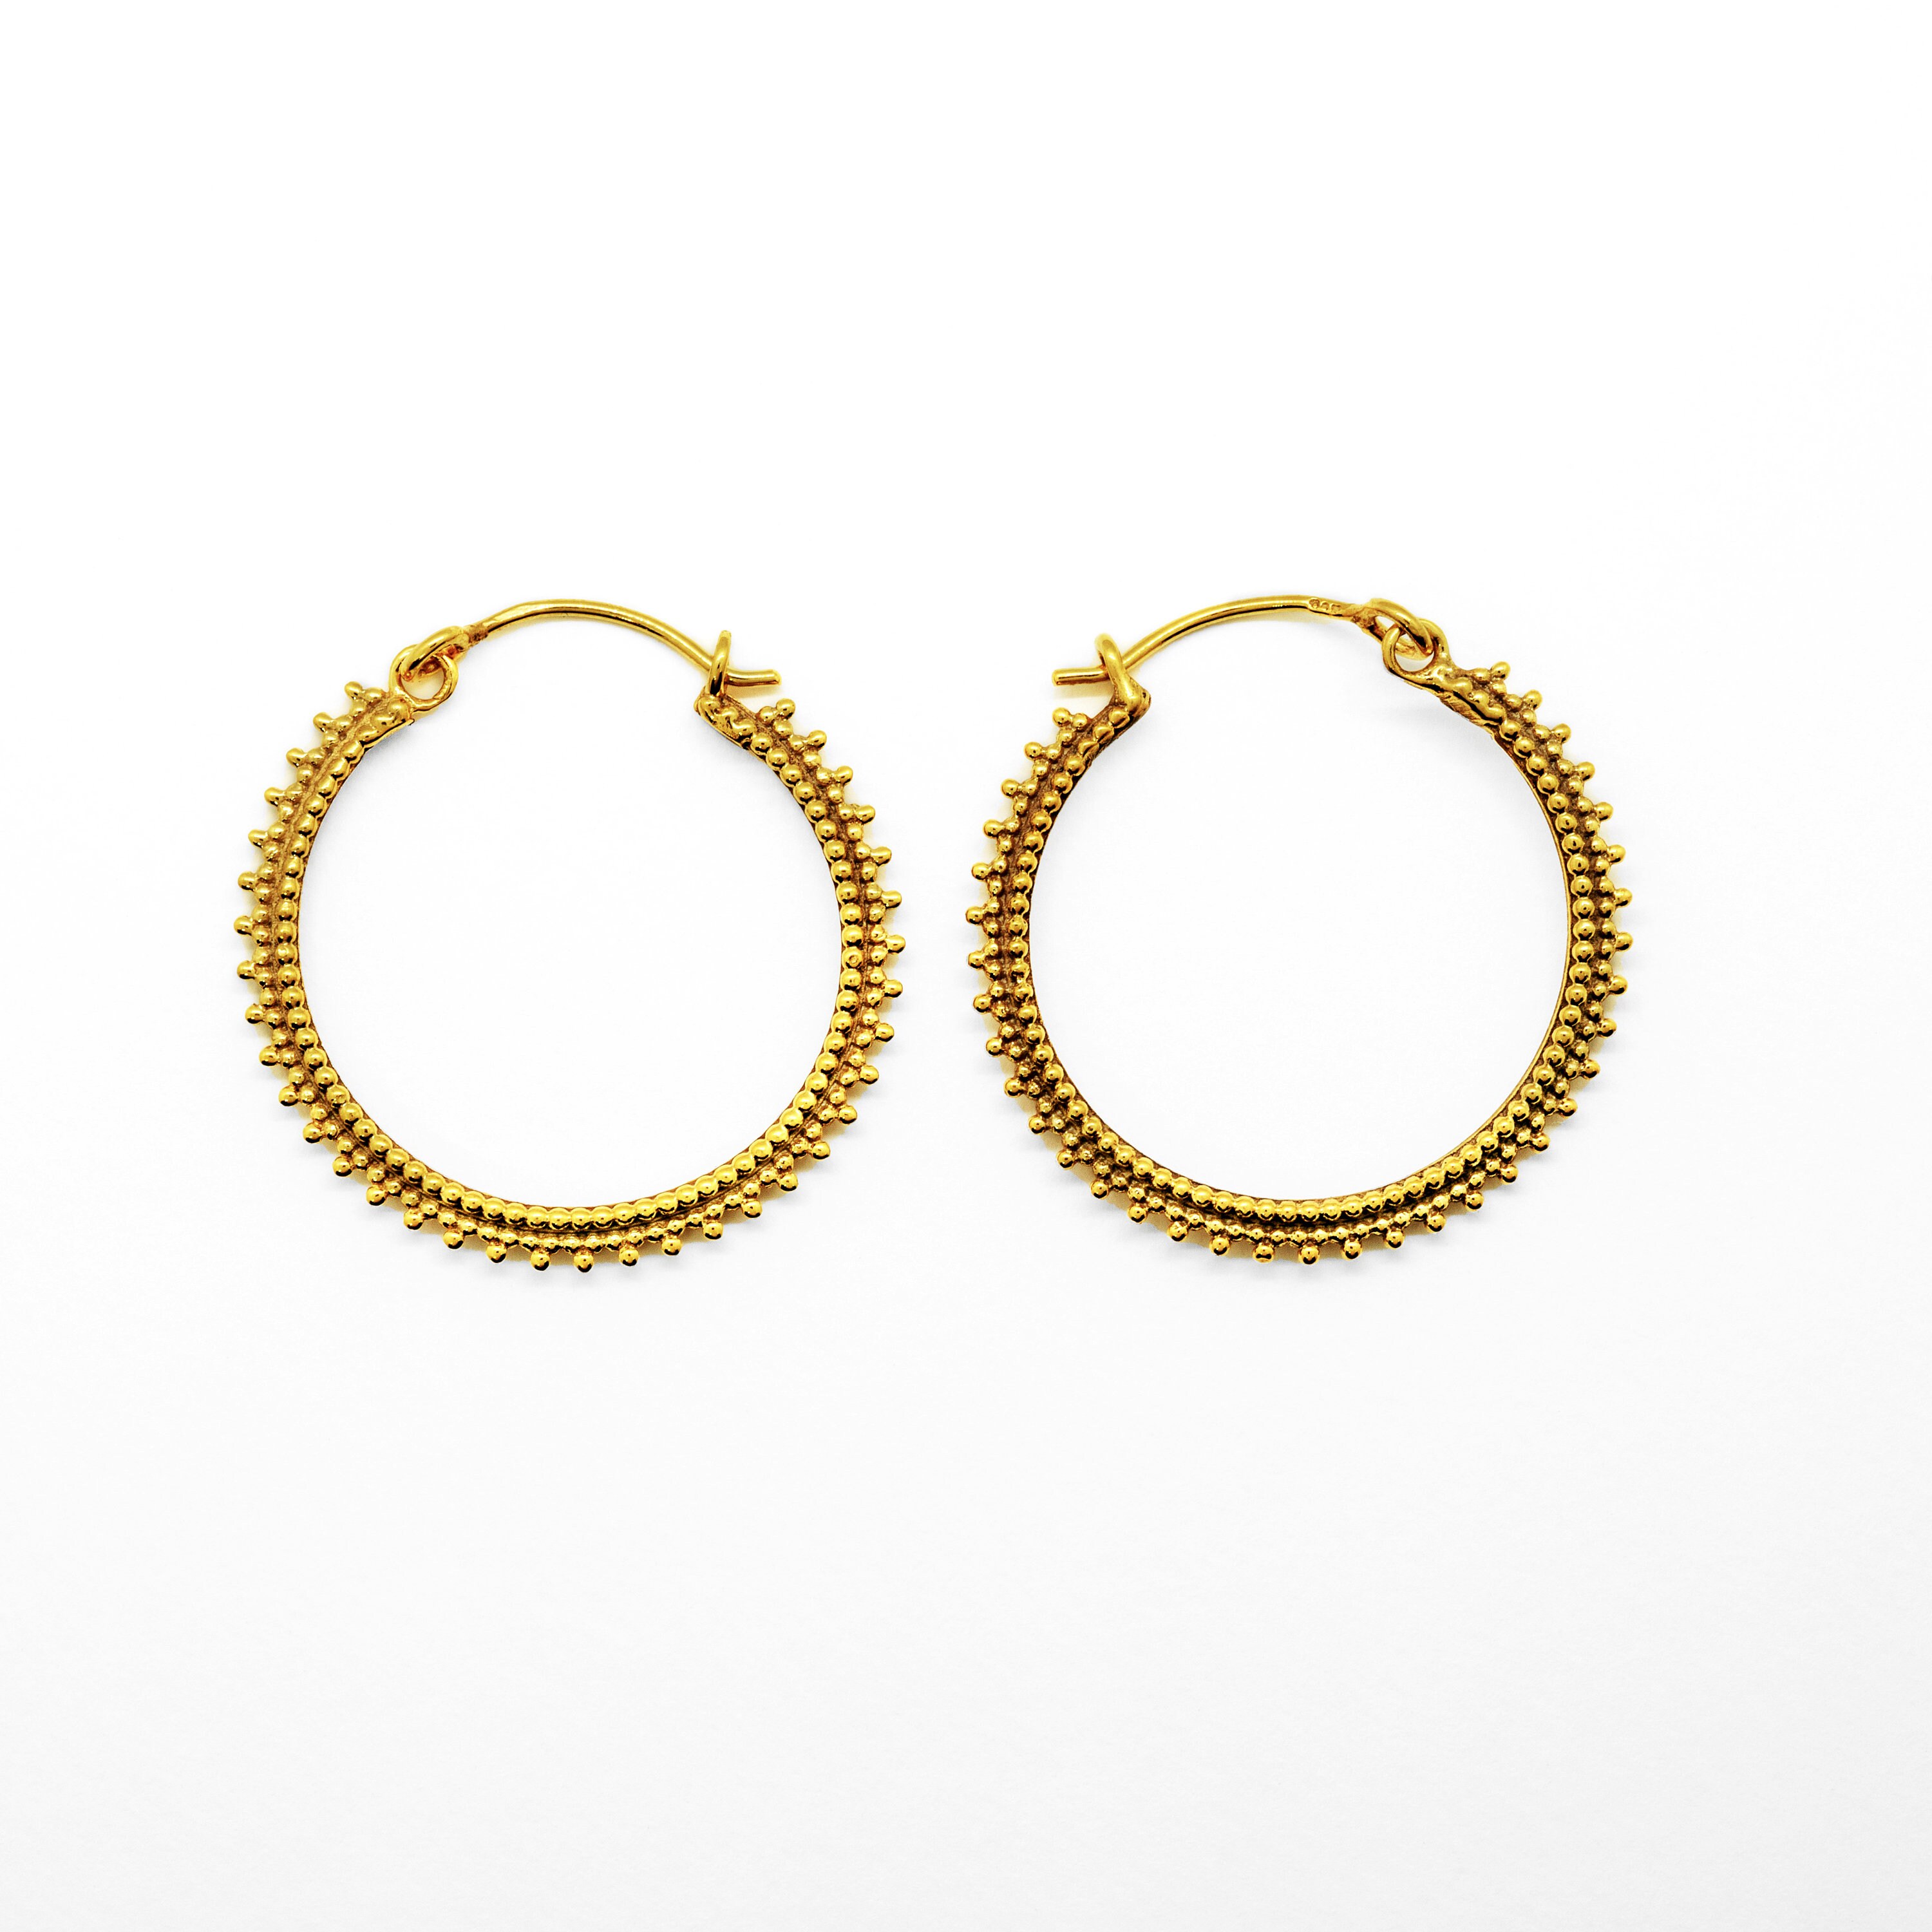 Details about   Indian Designer Goldplated Traditional Earrings Pendant 18K Hoop Fashion Jewelry 